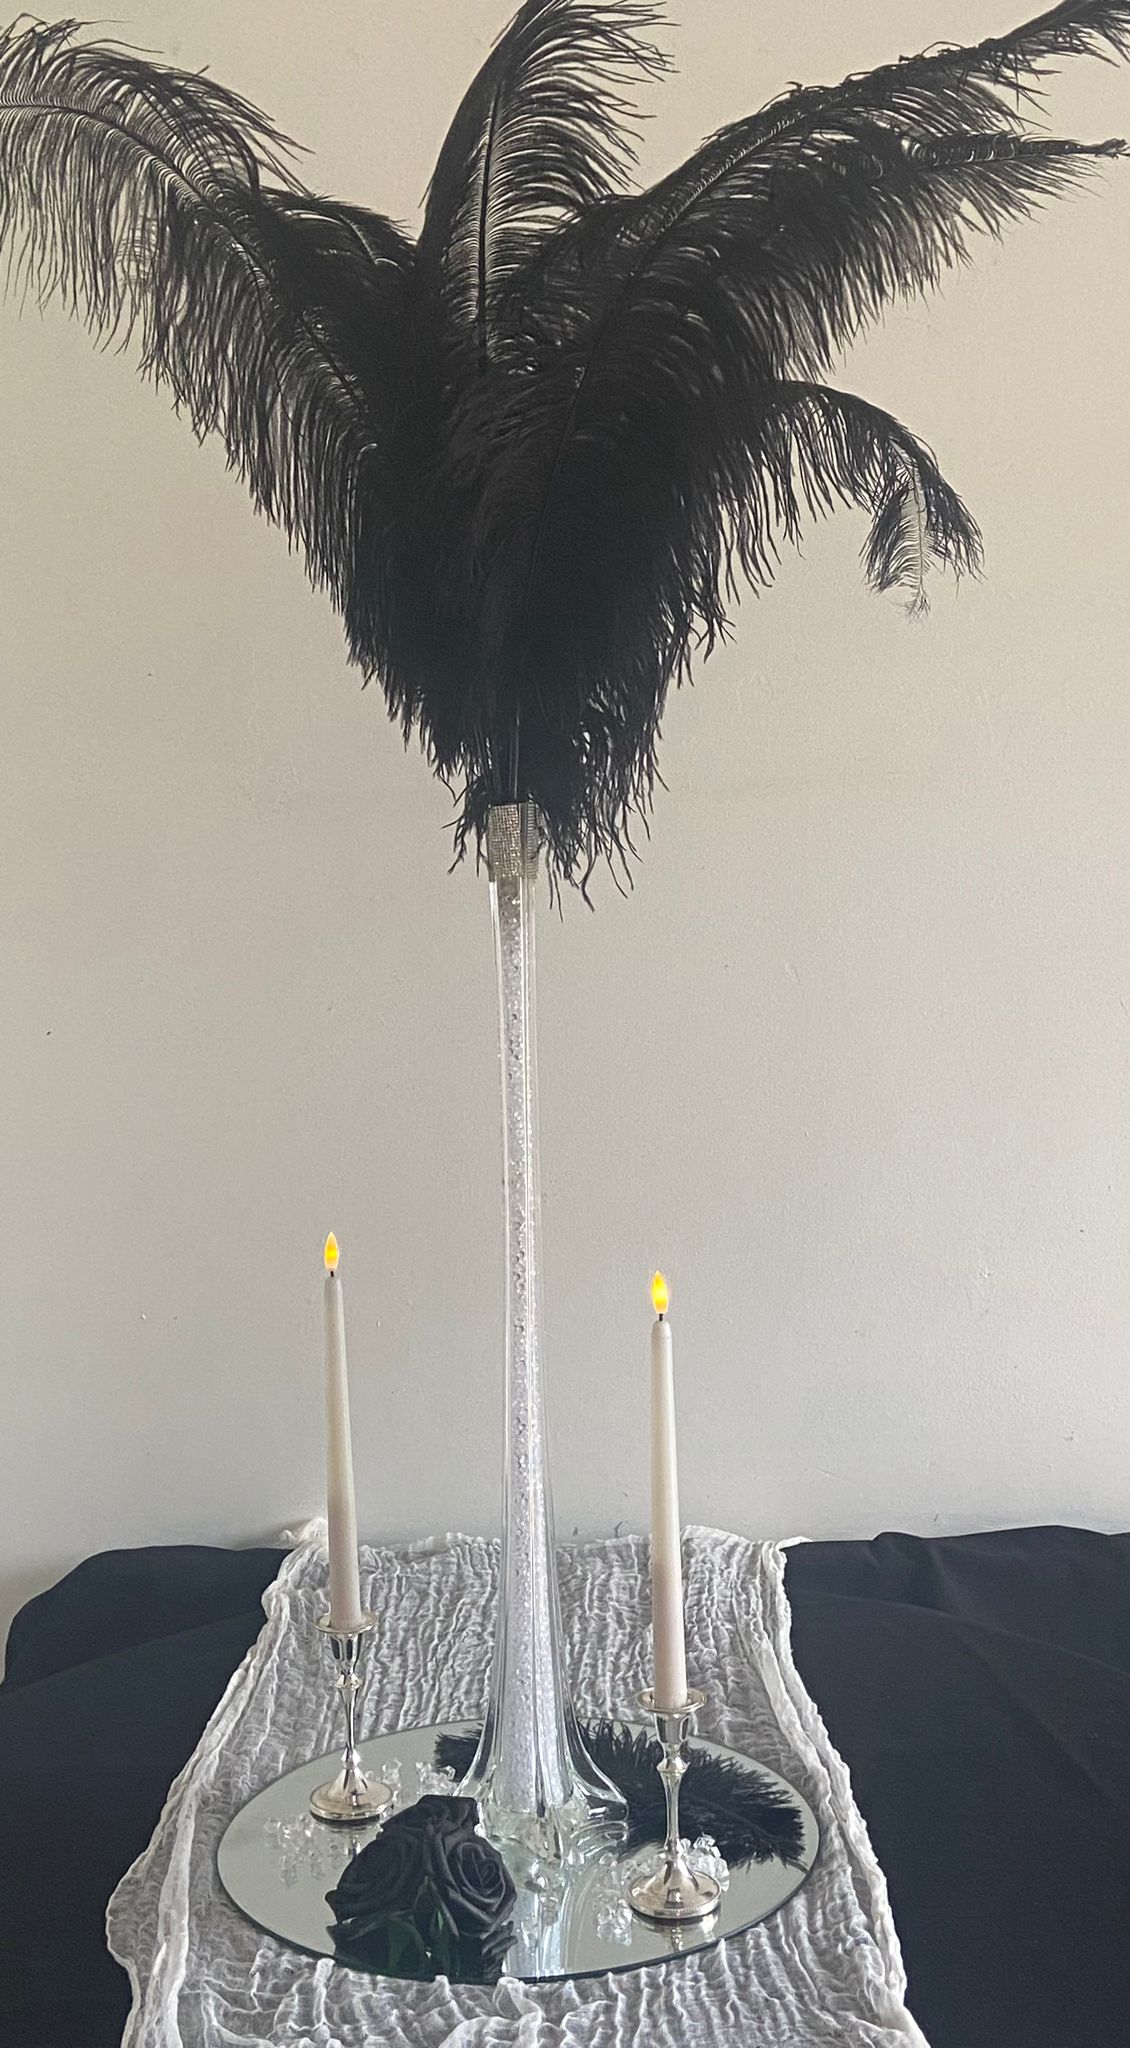 Tall thin glass vase with lots of black feathers